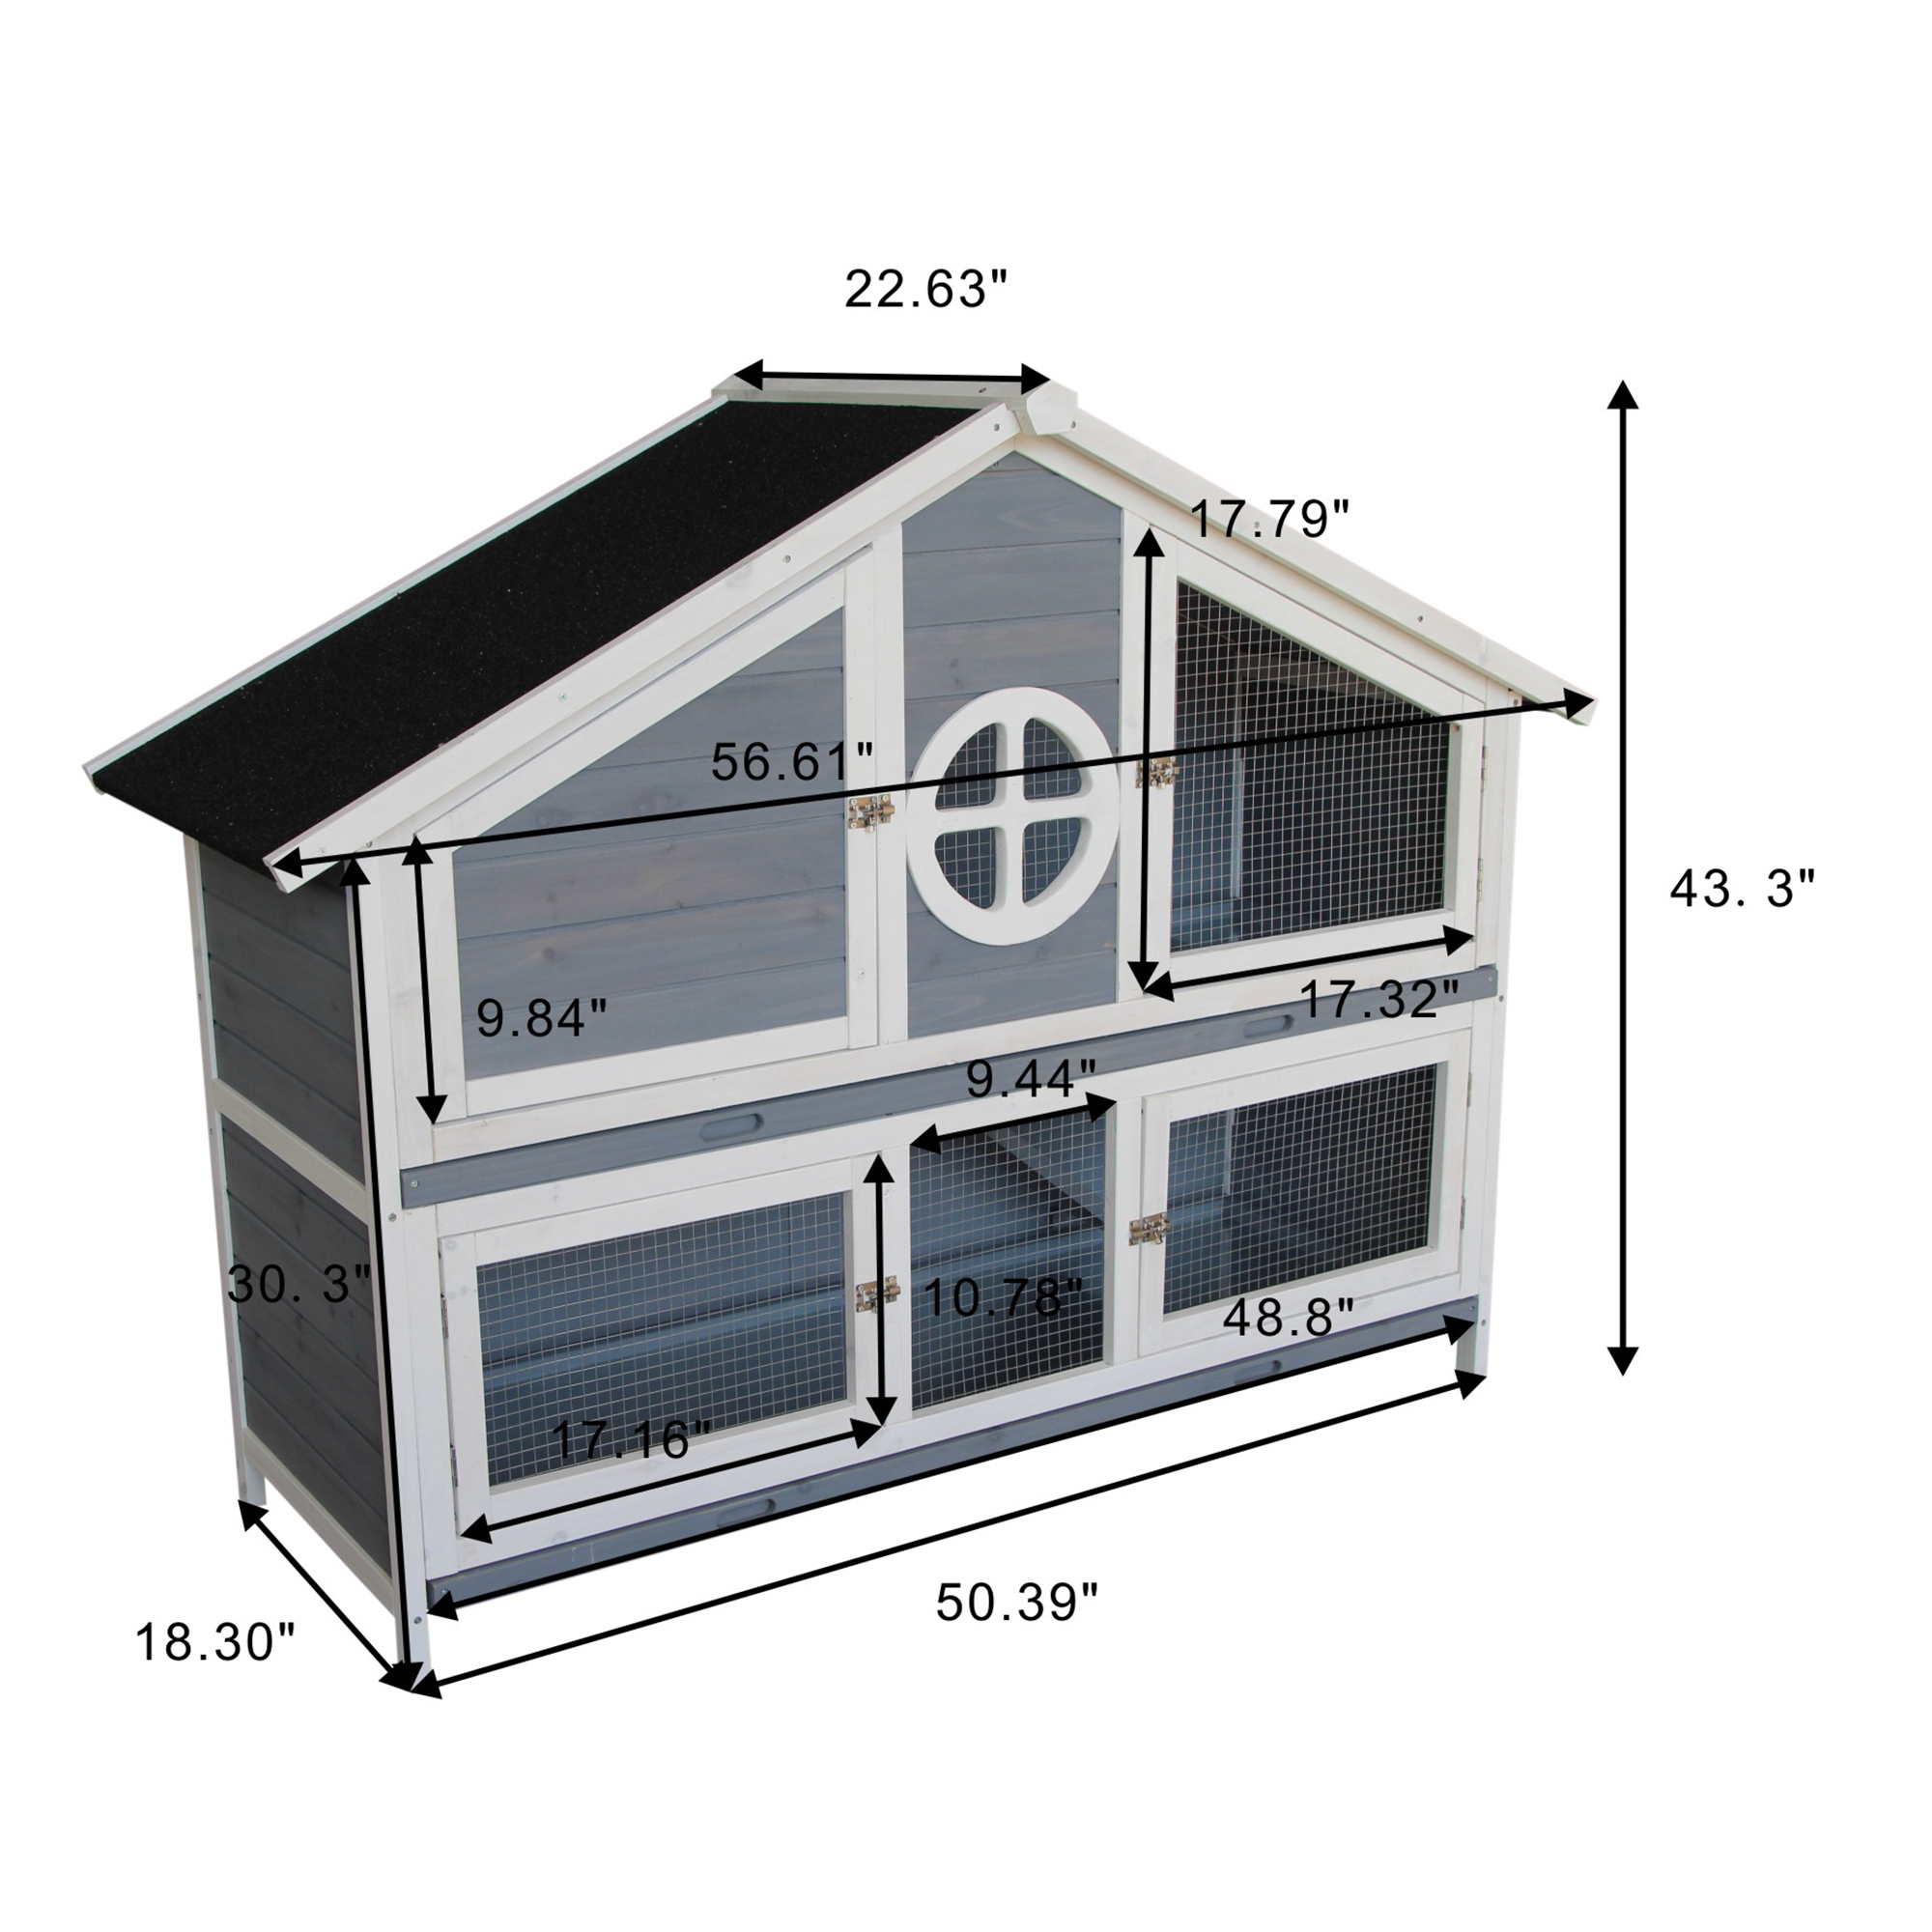 Best Selling Durable Using Windproof Solid Firwood Chicken House rabbit Coop-Boyel Living